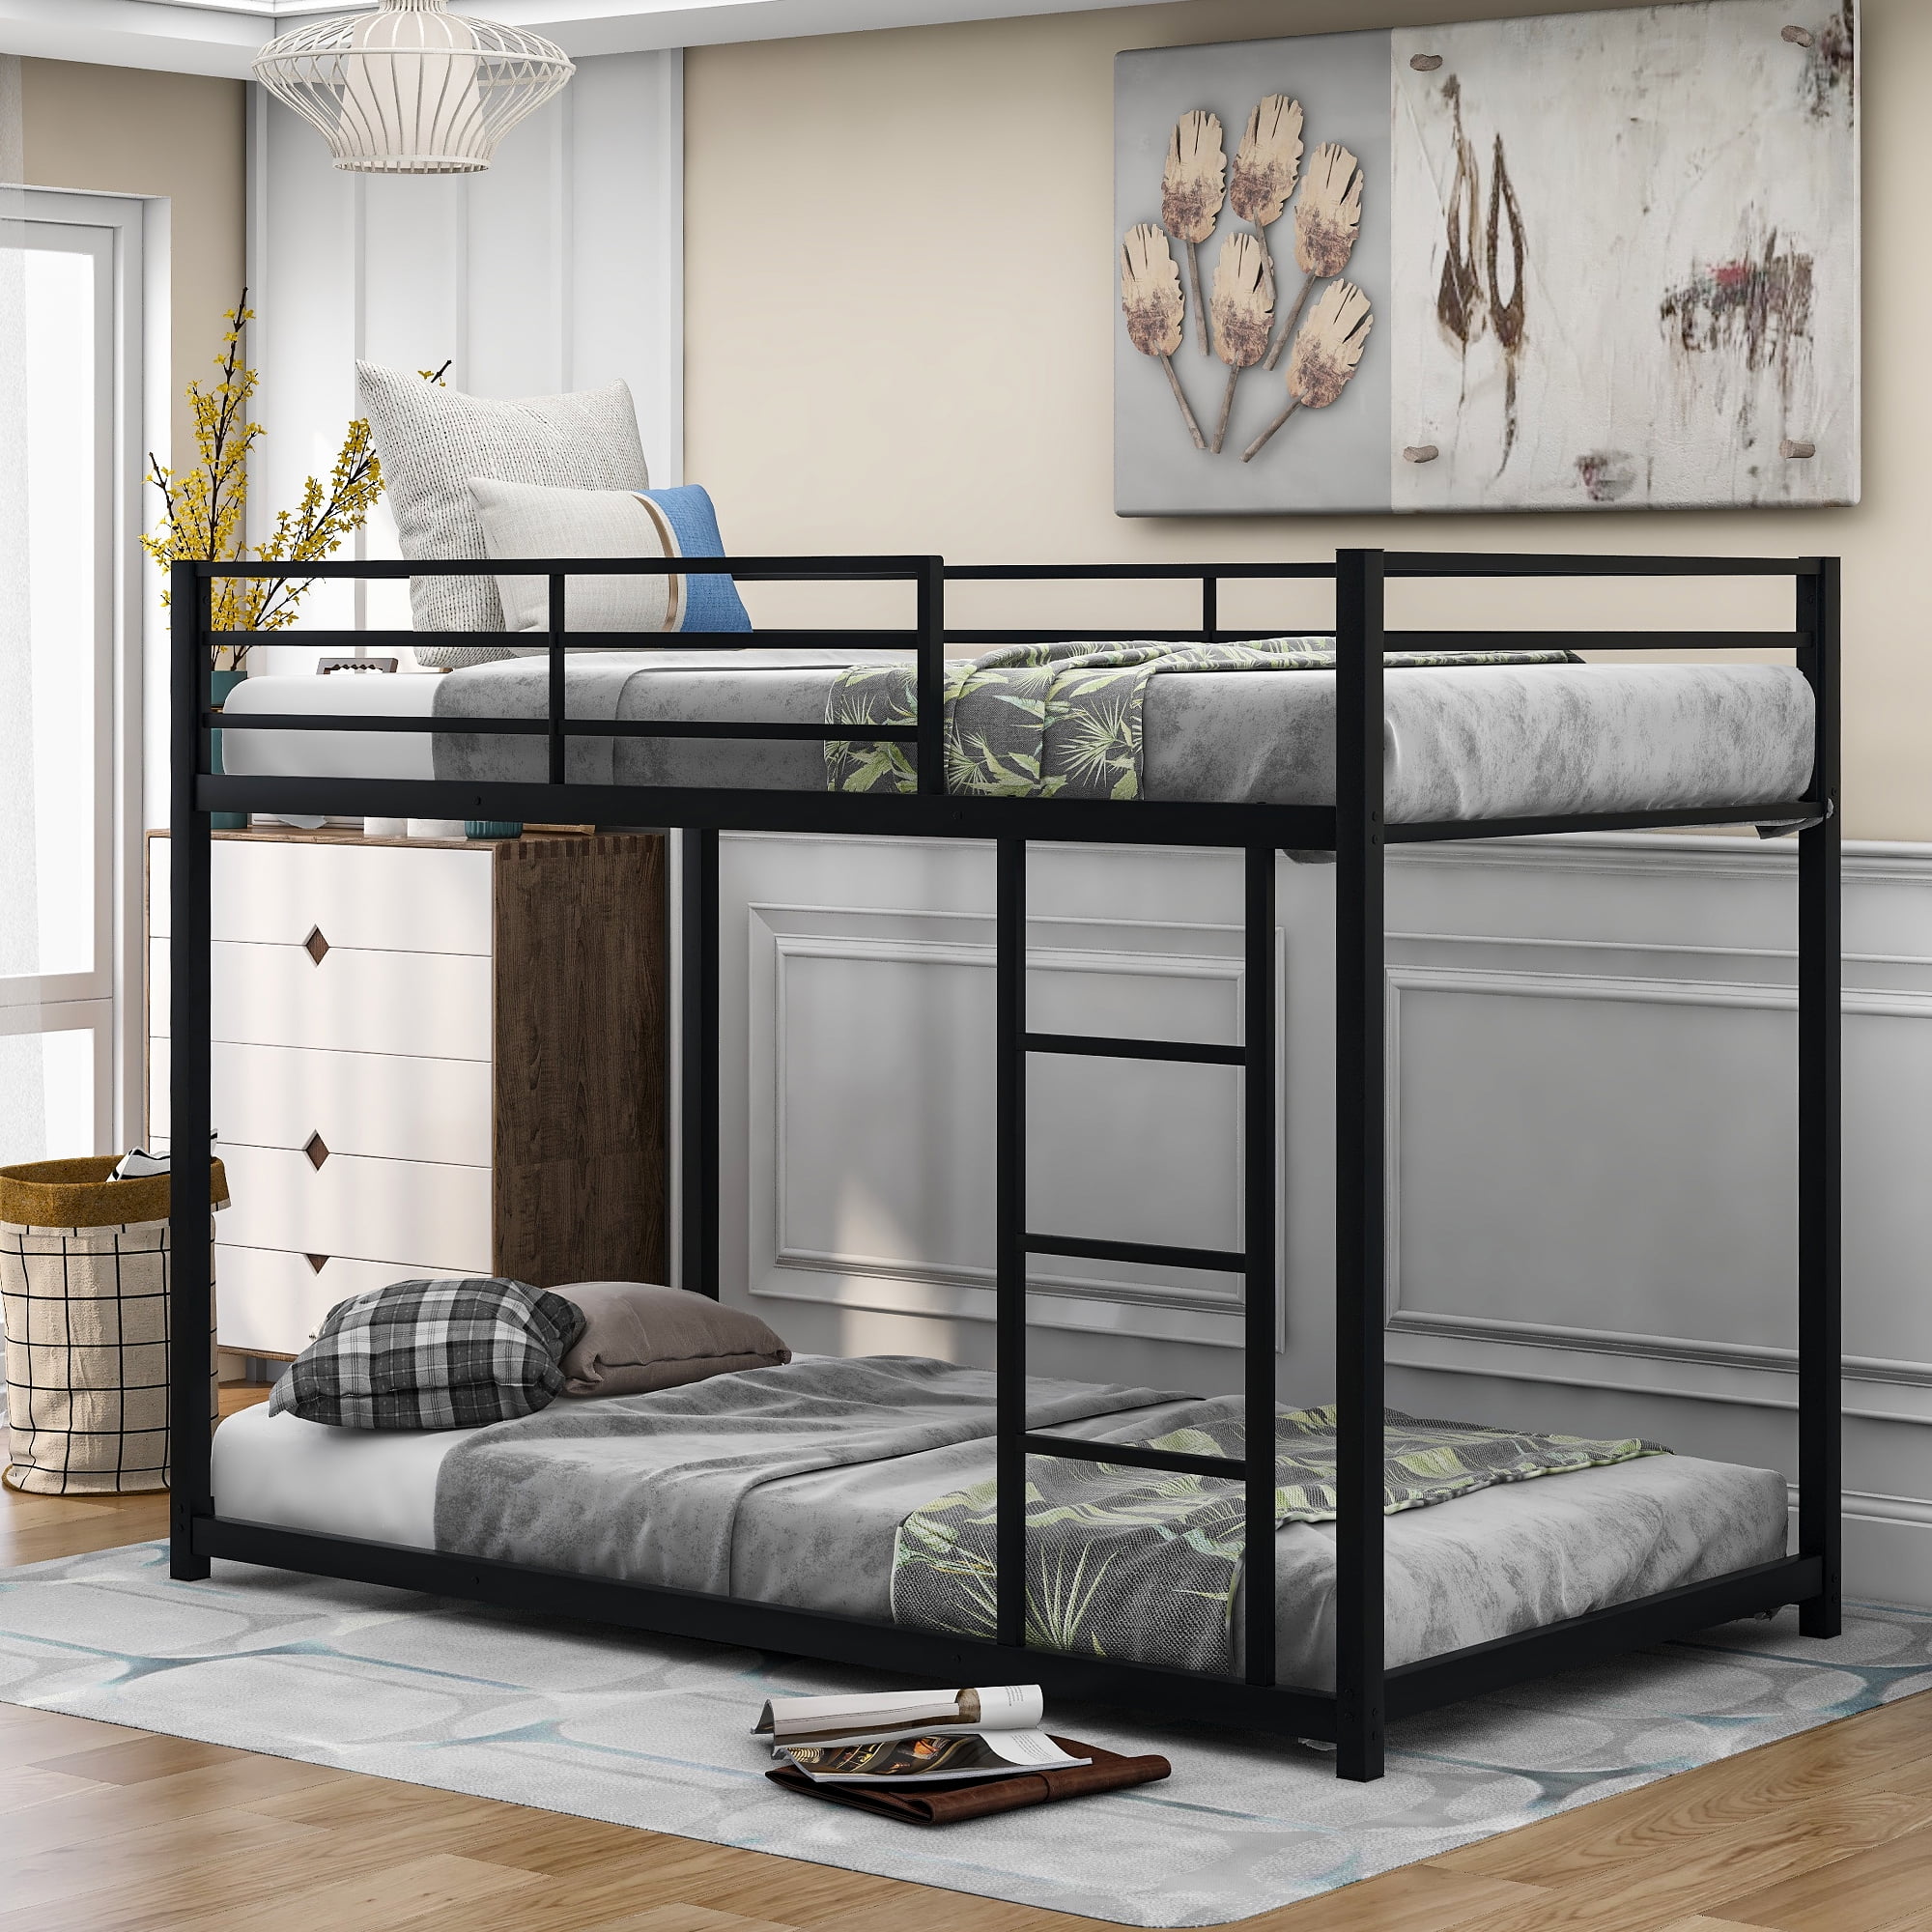 Euroco Twin Metal Low Bunk Bed With, Bunk Beds Sacramento